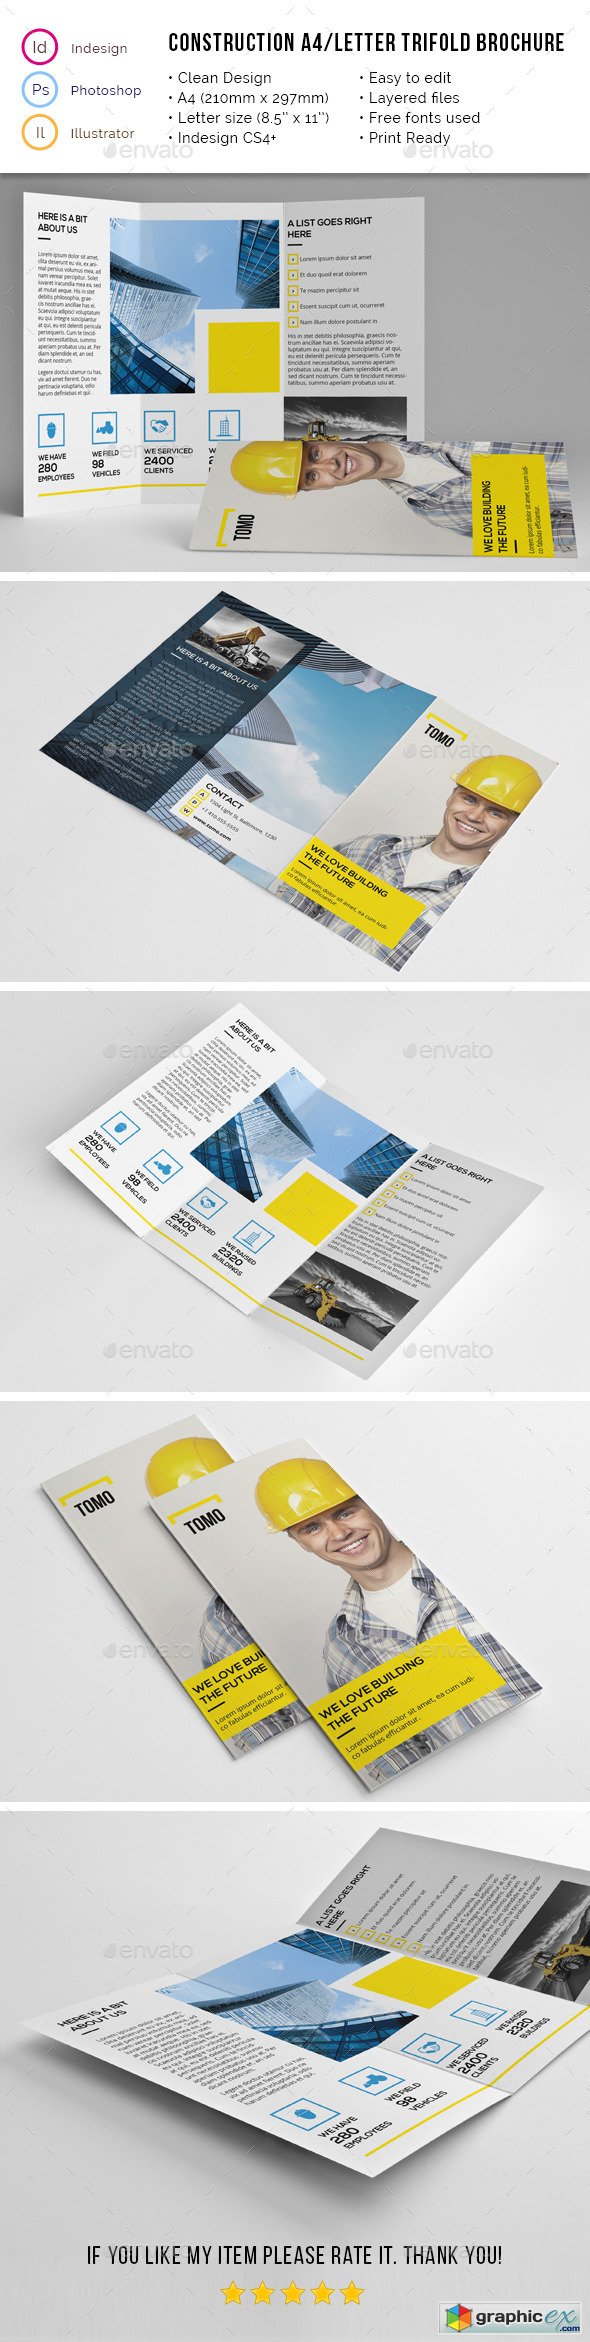 Construction Company A4 Letter Trifold